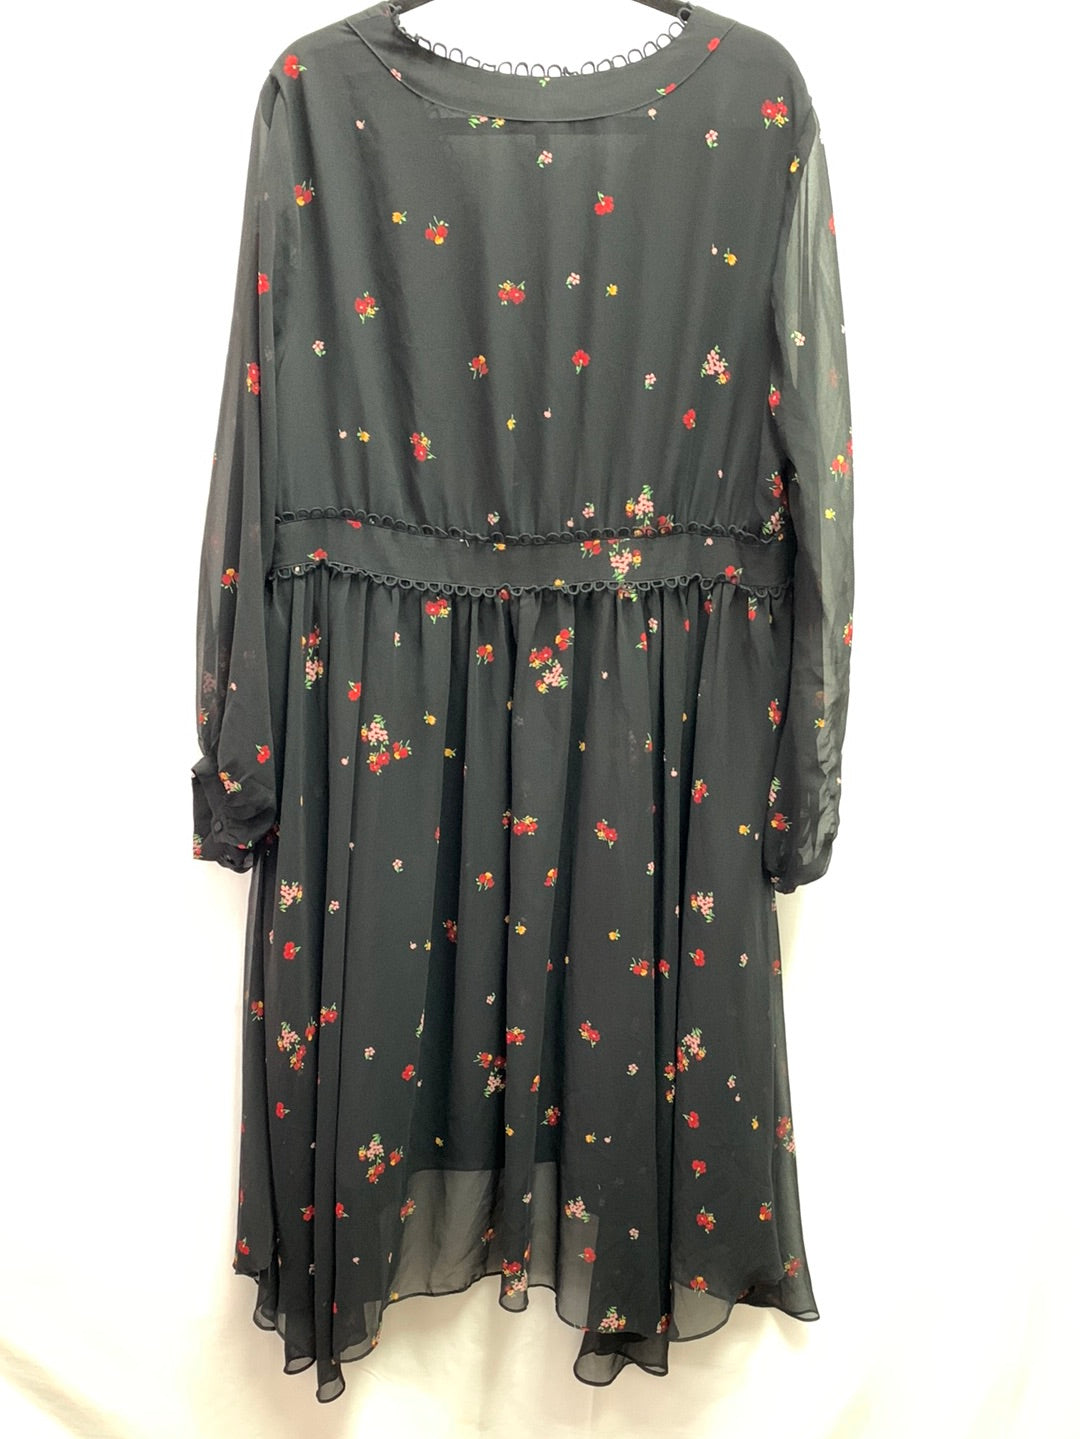 NWT - WHO WHAT WEAR black floral ditzy bouquet Sheer Midi Dress  - 1X